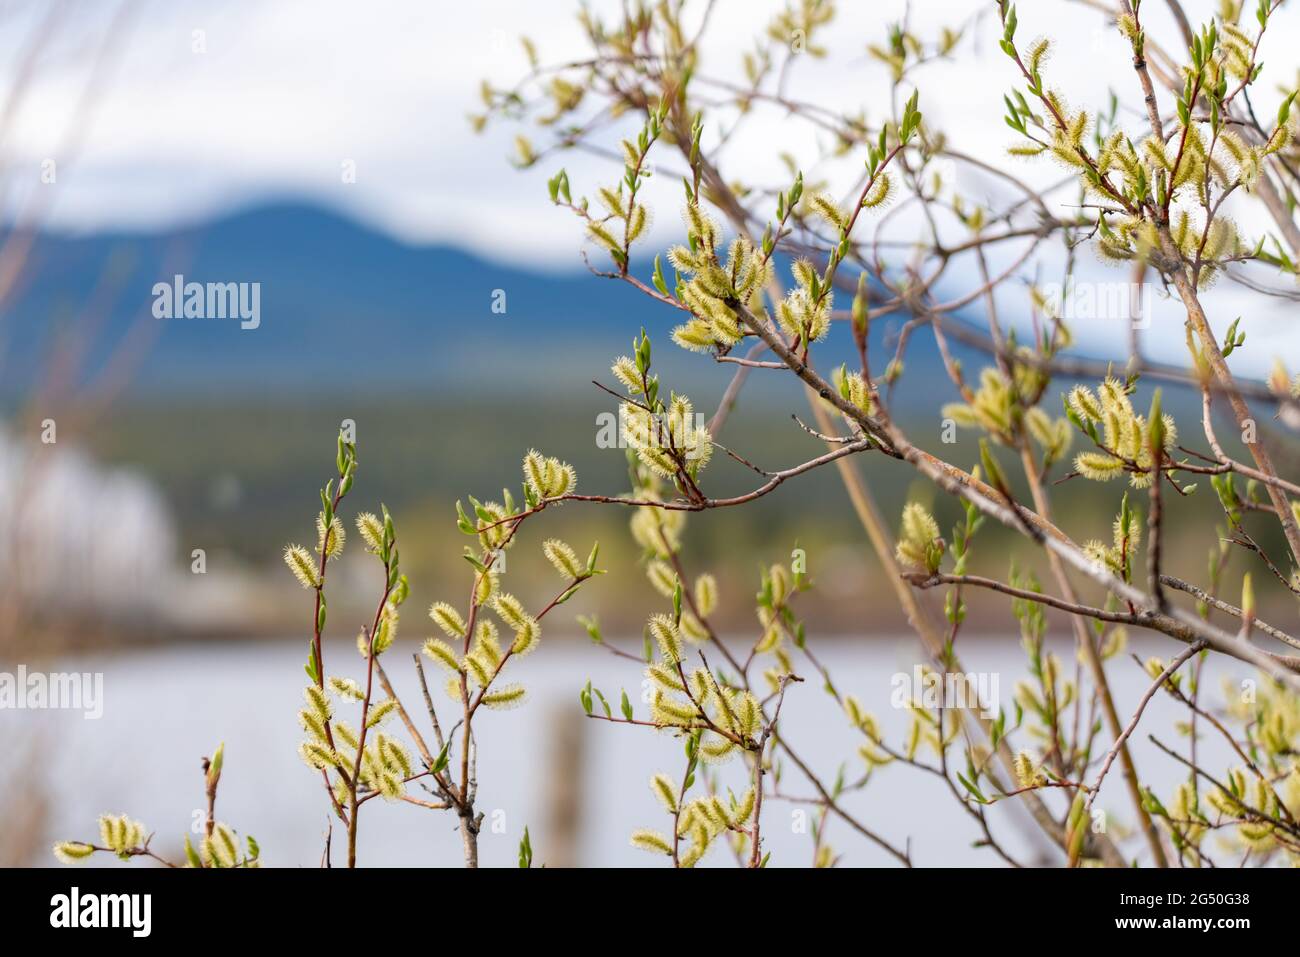 Close up of a Creeping Willow plant, bush seen in early spring bloom with blurred mountains in the background. Salix repens with bright green colors. Stock Photo